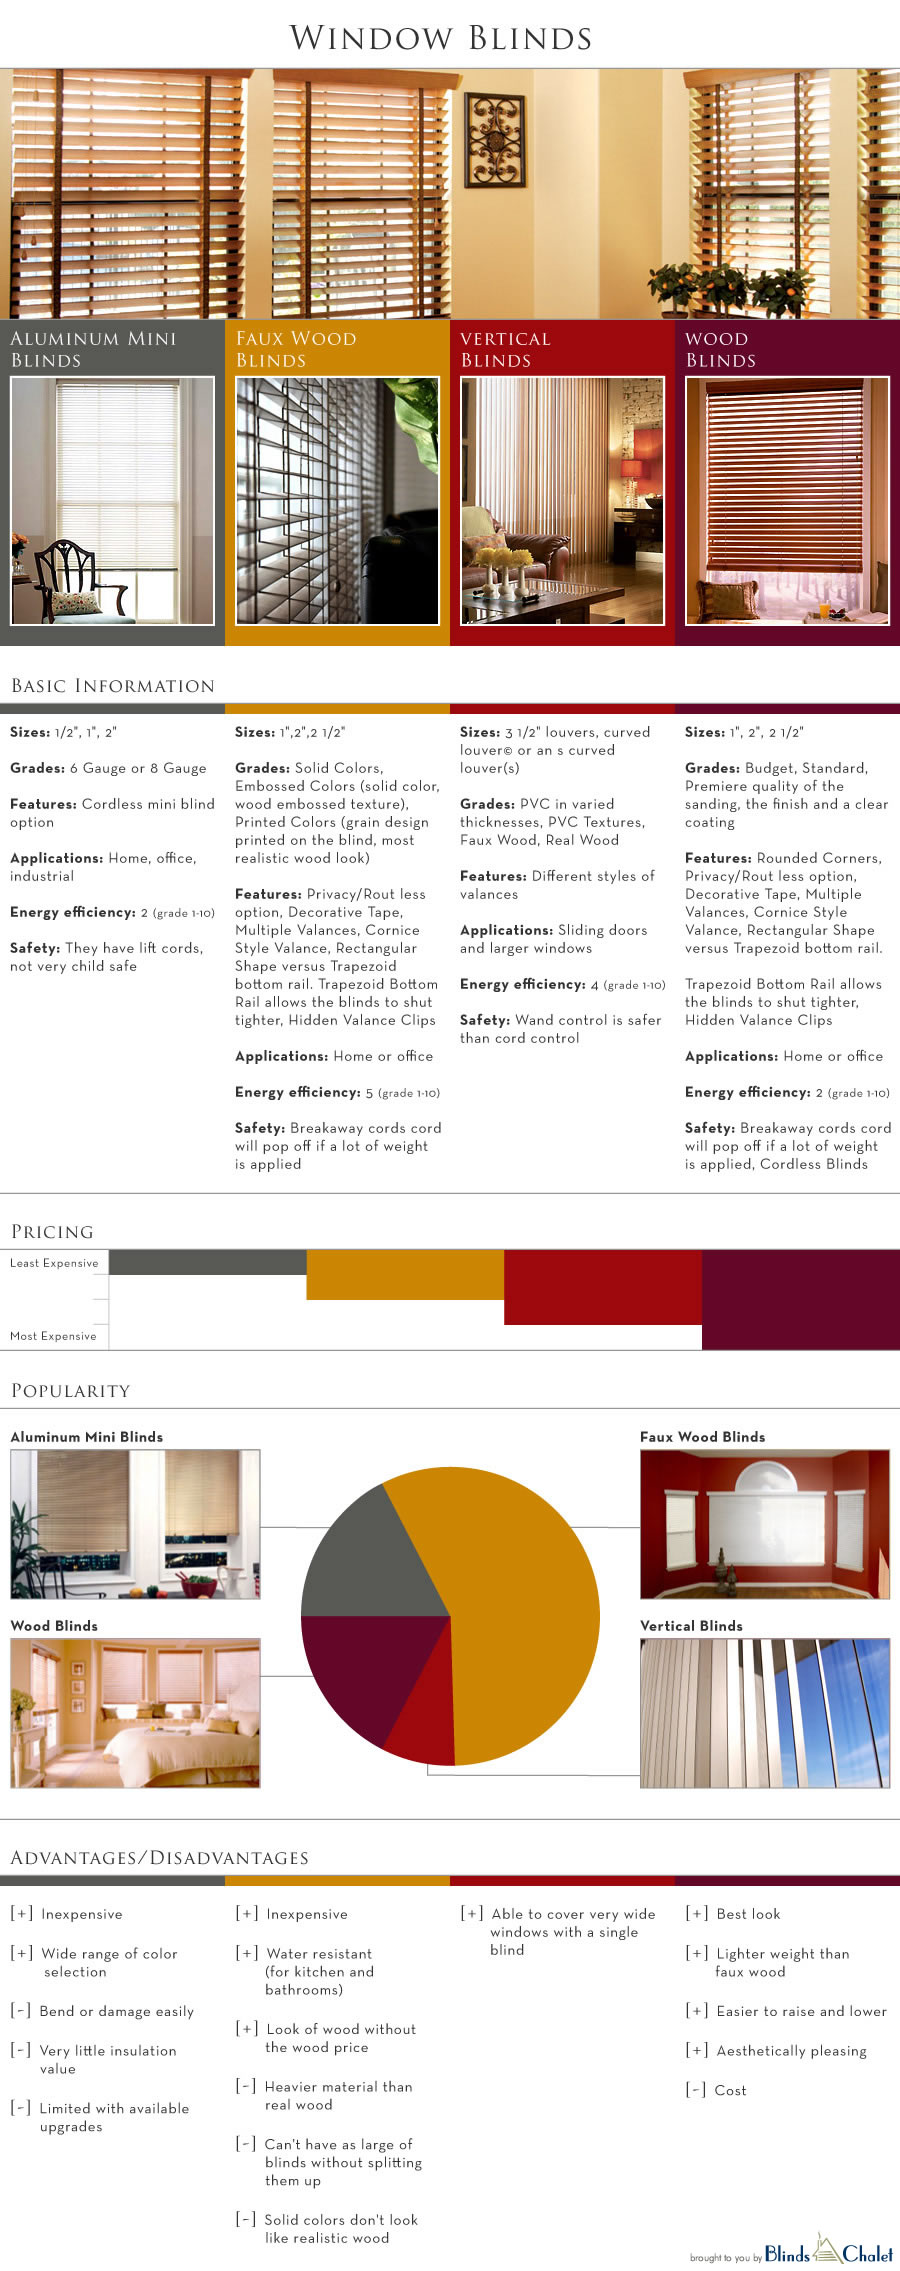 Window Blinds Infographic by Blinds Chalet